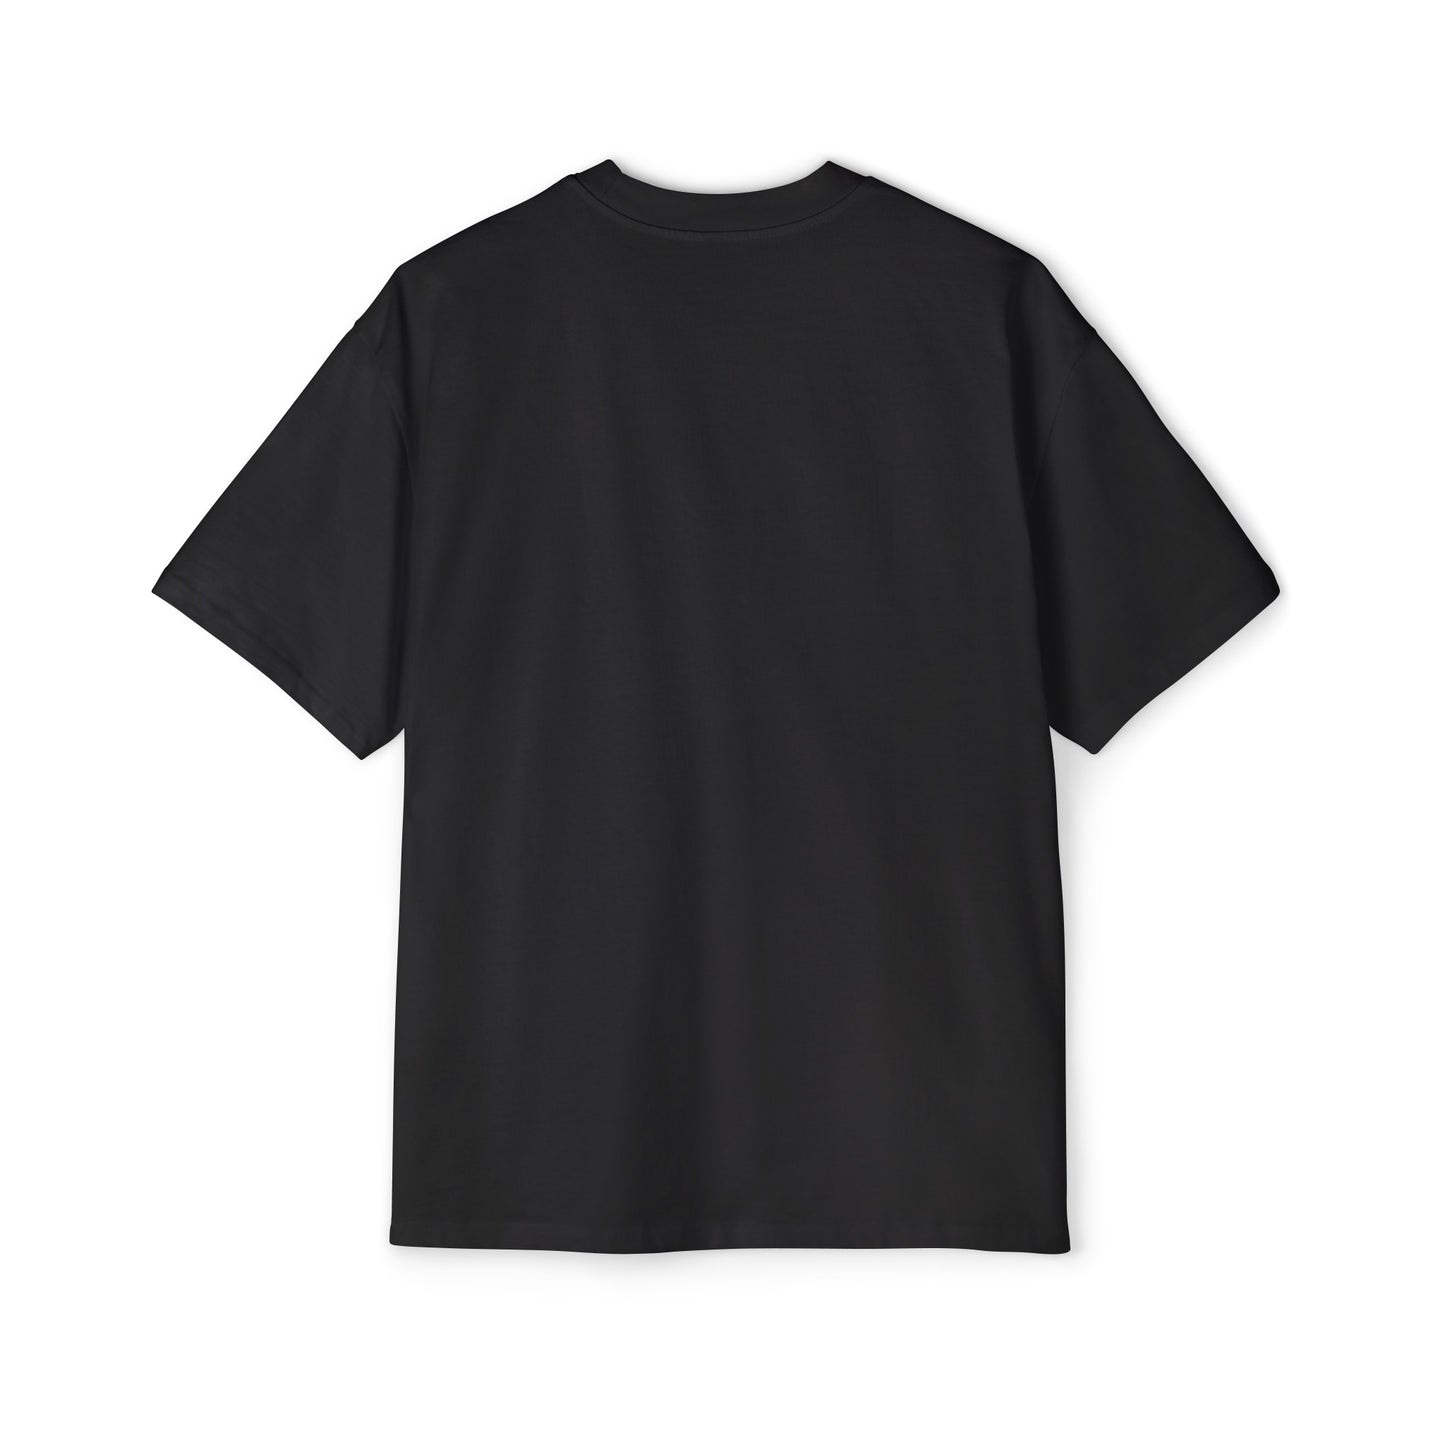 Caison Armstrong Oversized Tee